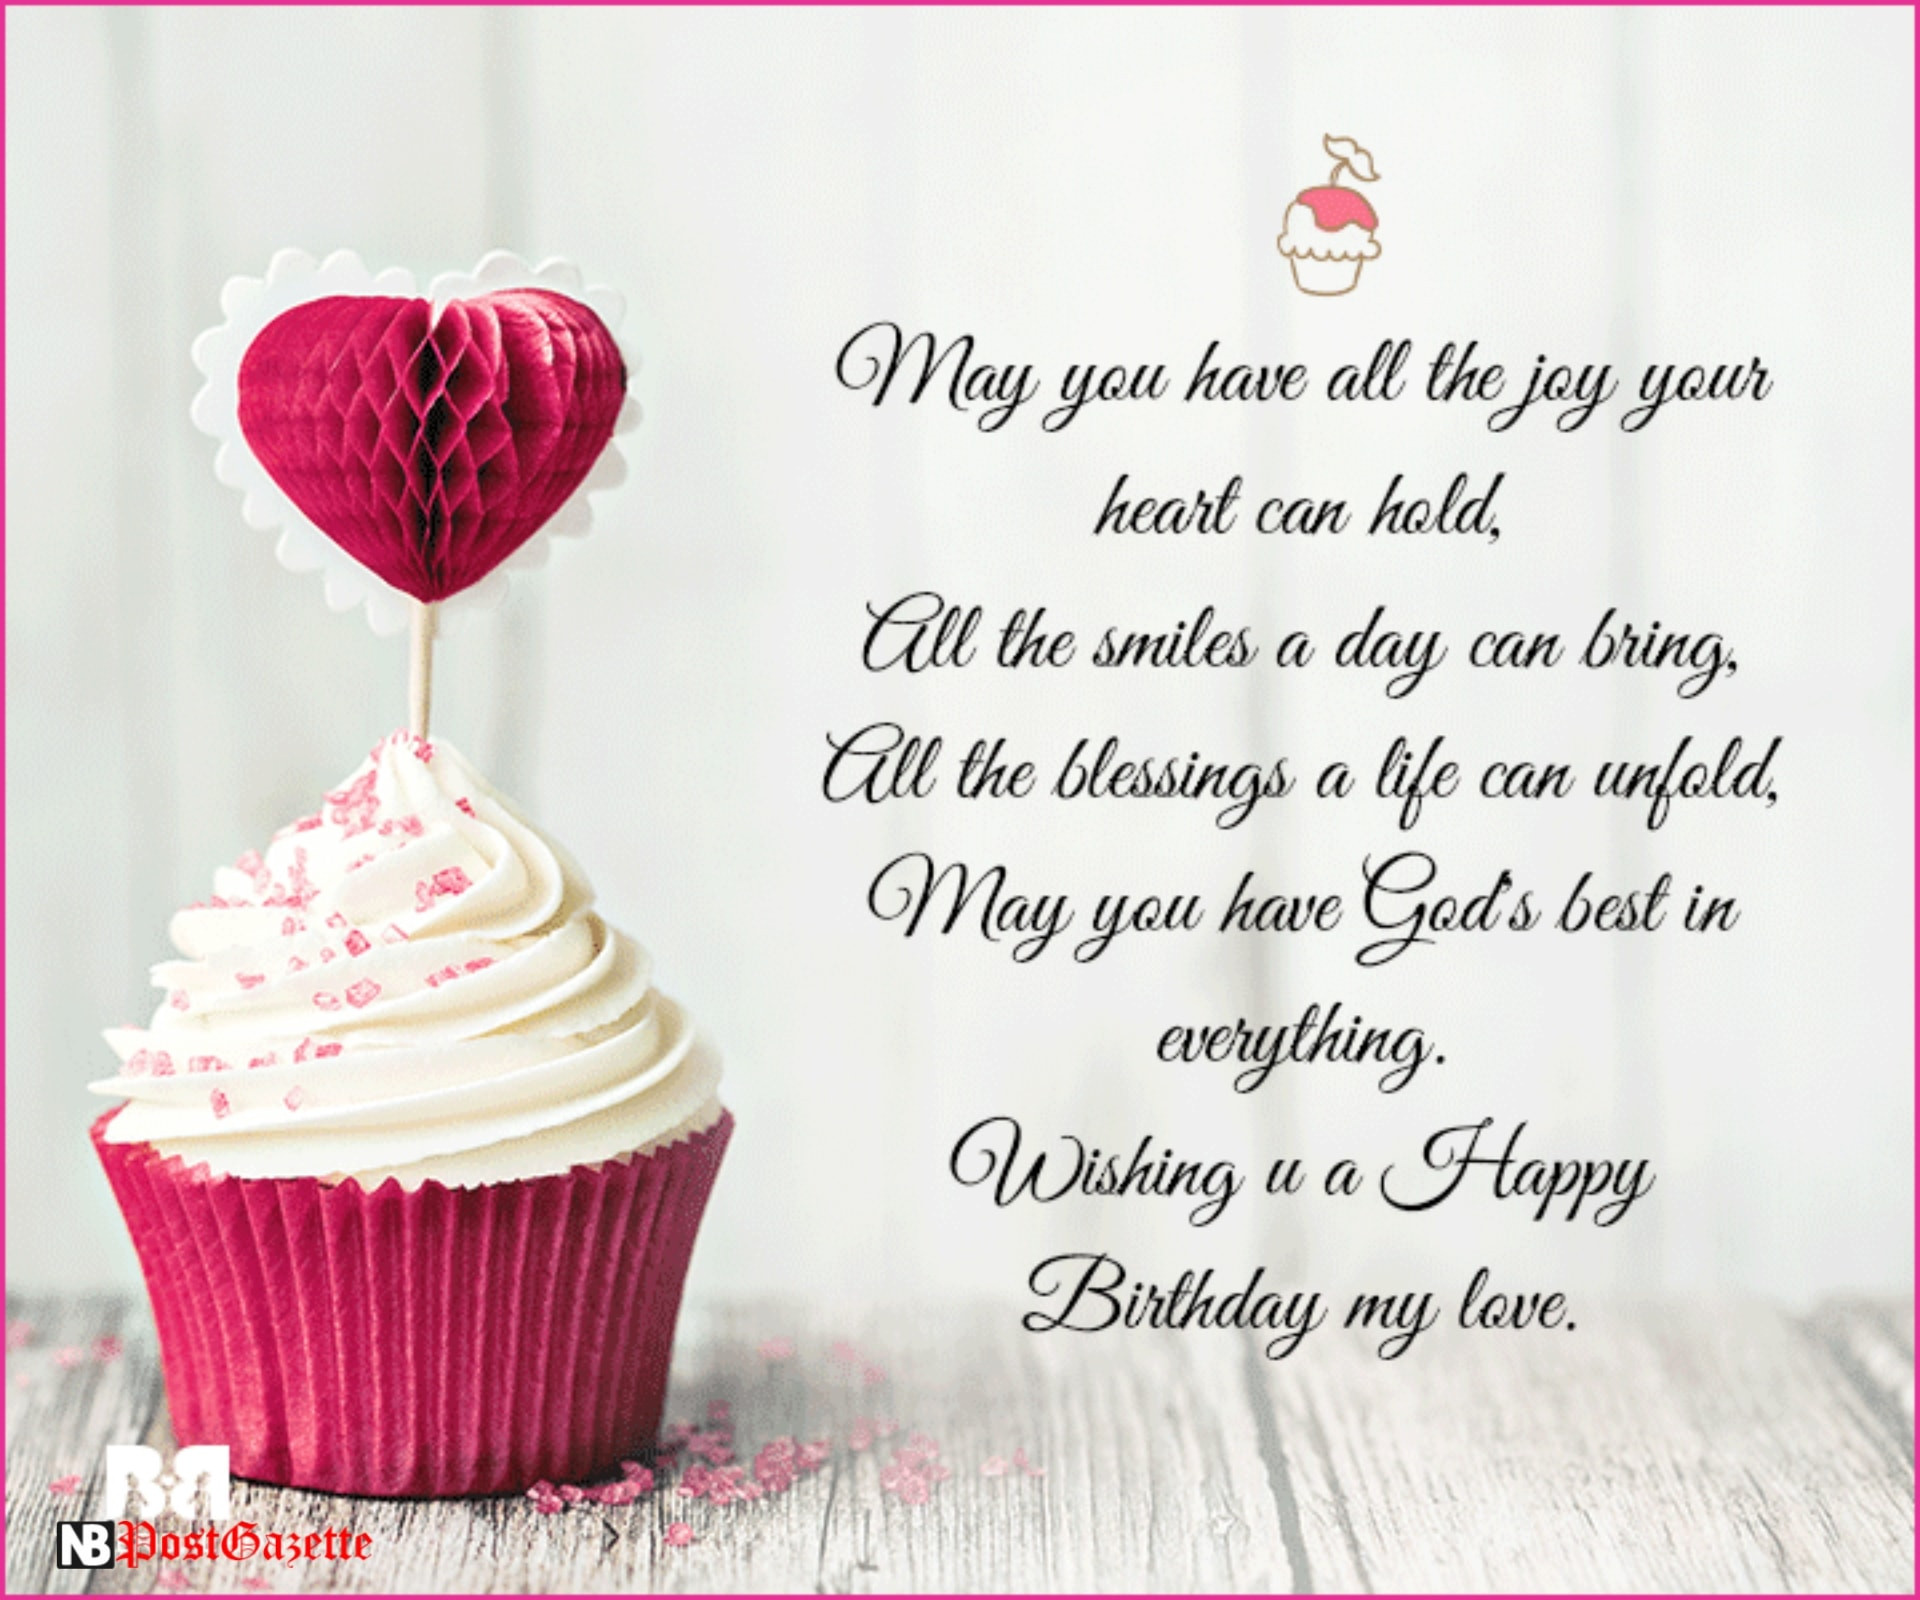 Birthday Wishes For Someone Special
 Top Best Happy Birthday Wishes SMS Quotes & Text Messages